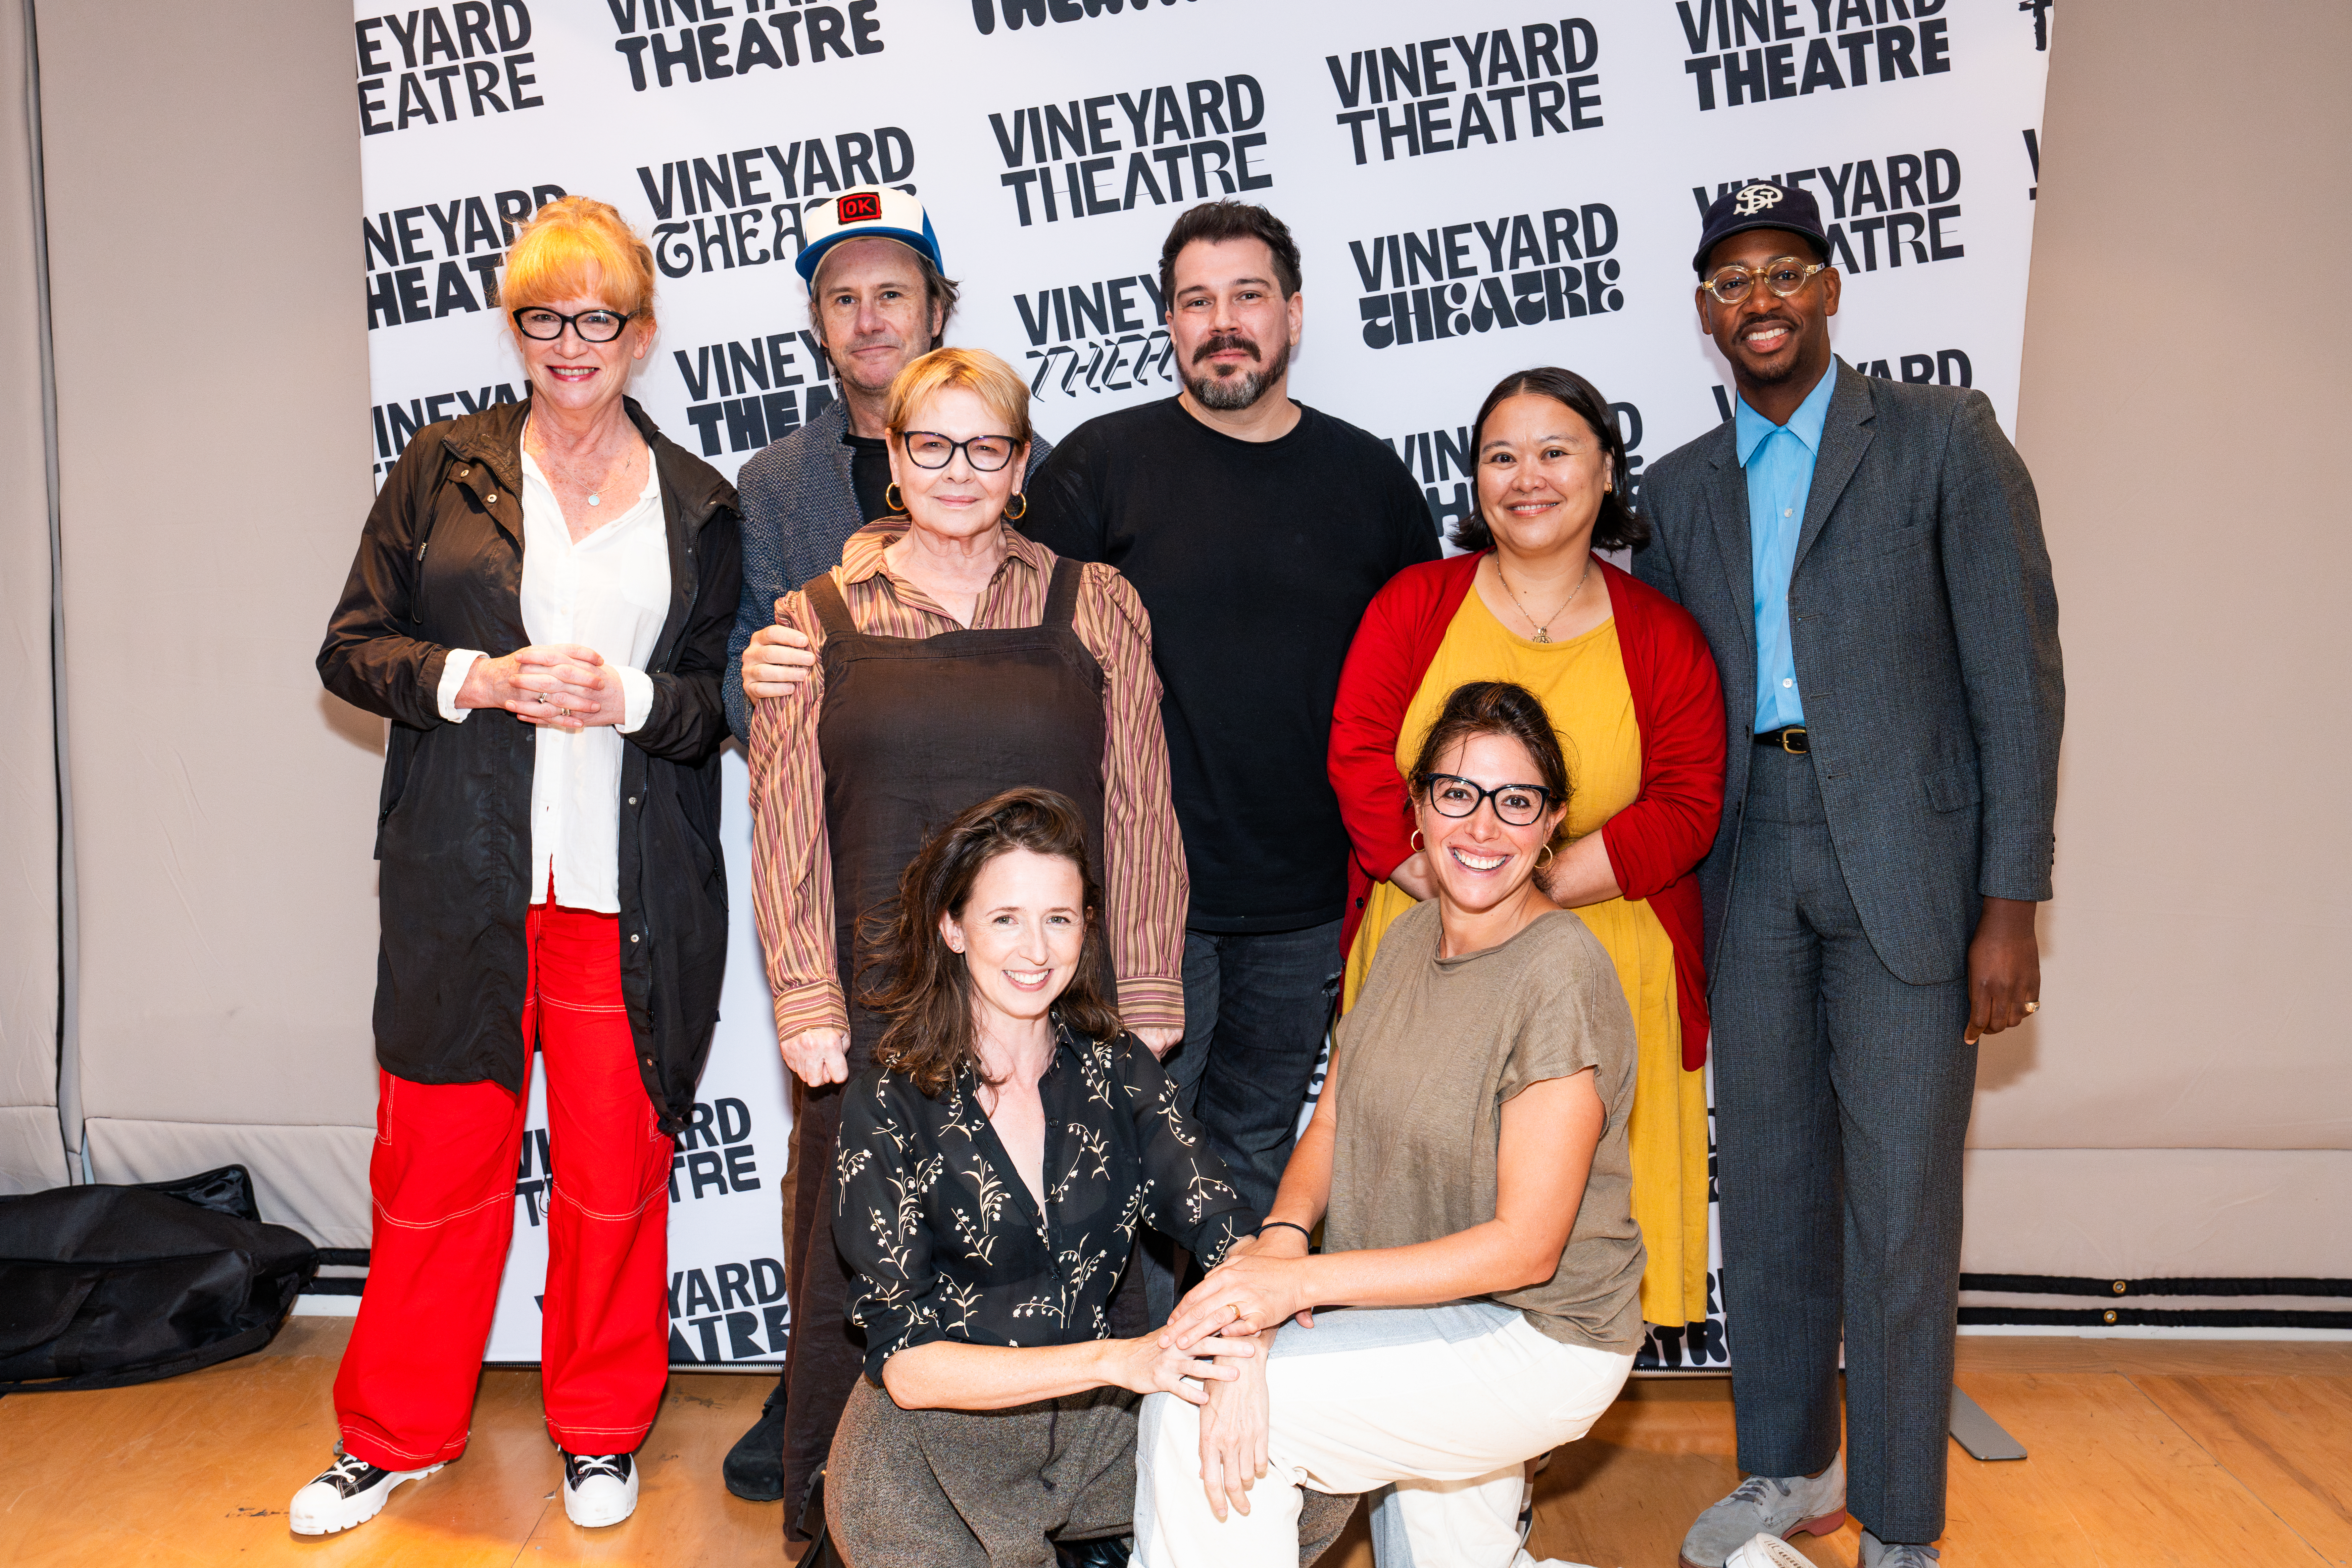 The Cast of Scene Partners at Vineyard Theatre Credit Carrington Spires